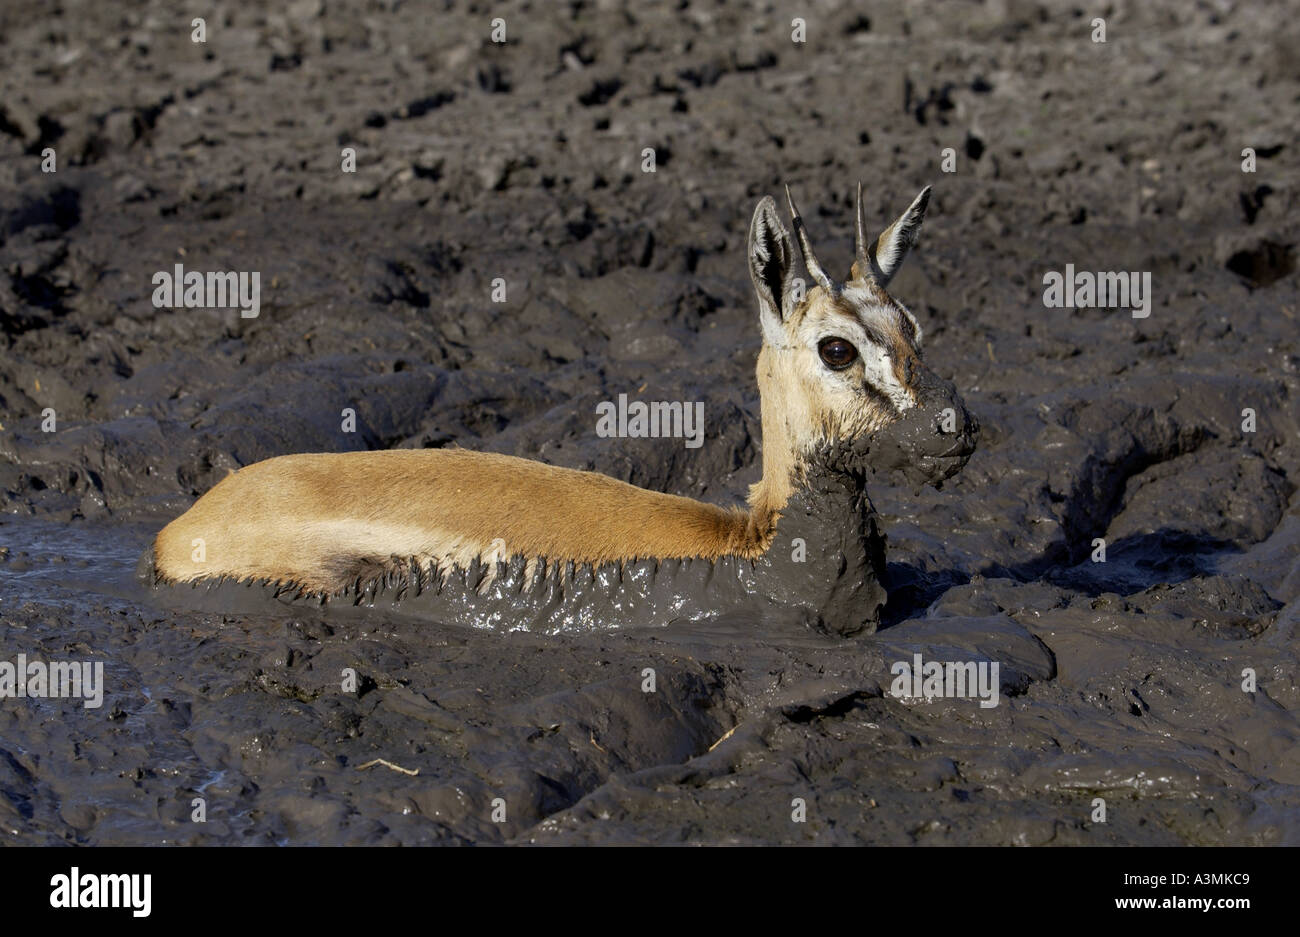 Young Thomsons Gazelle stuck in the mud of a drying river bed Grumeti area Tanzania Stock Photo